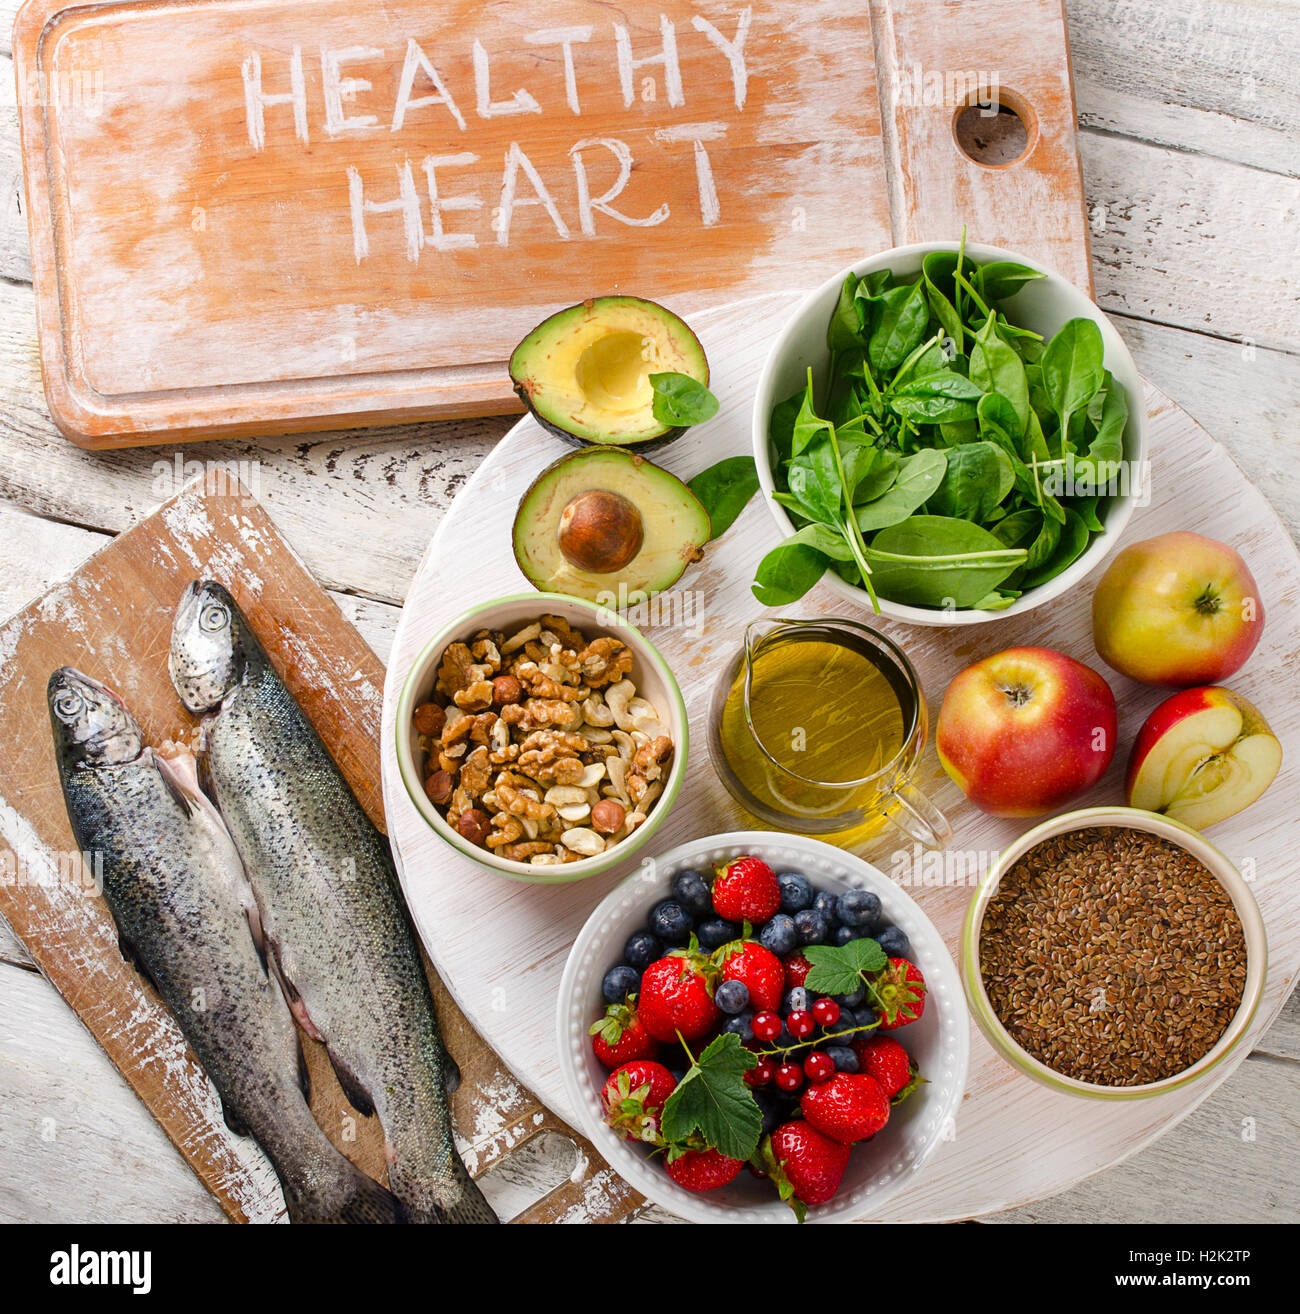 Best Food for healthy Heart. Heart-healthy diet.Top view Stock Photo